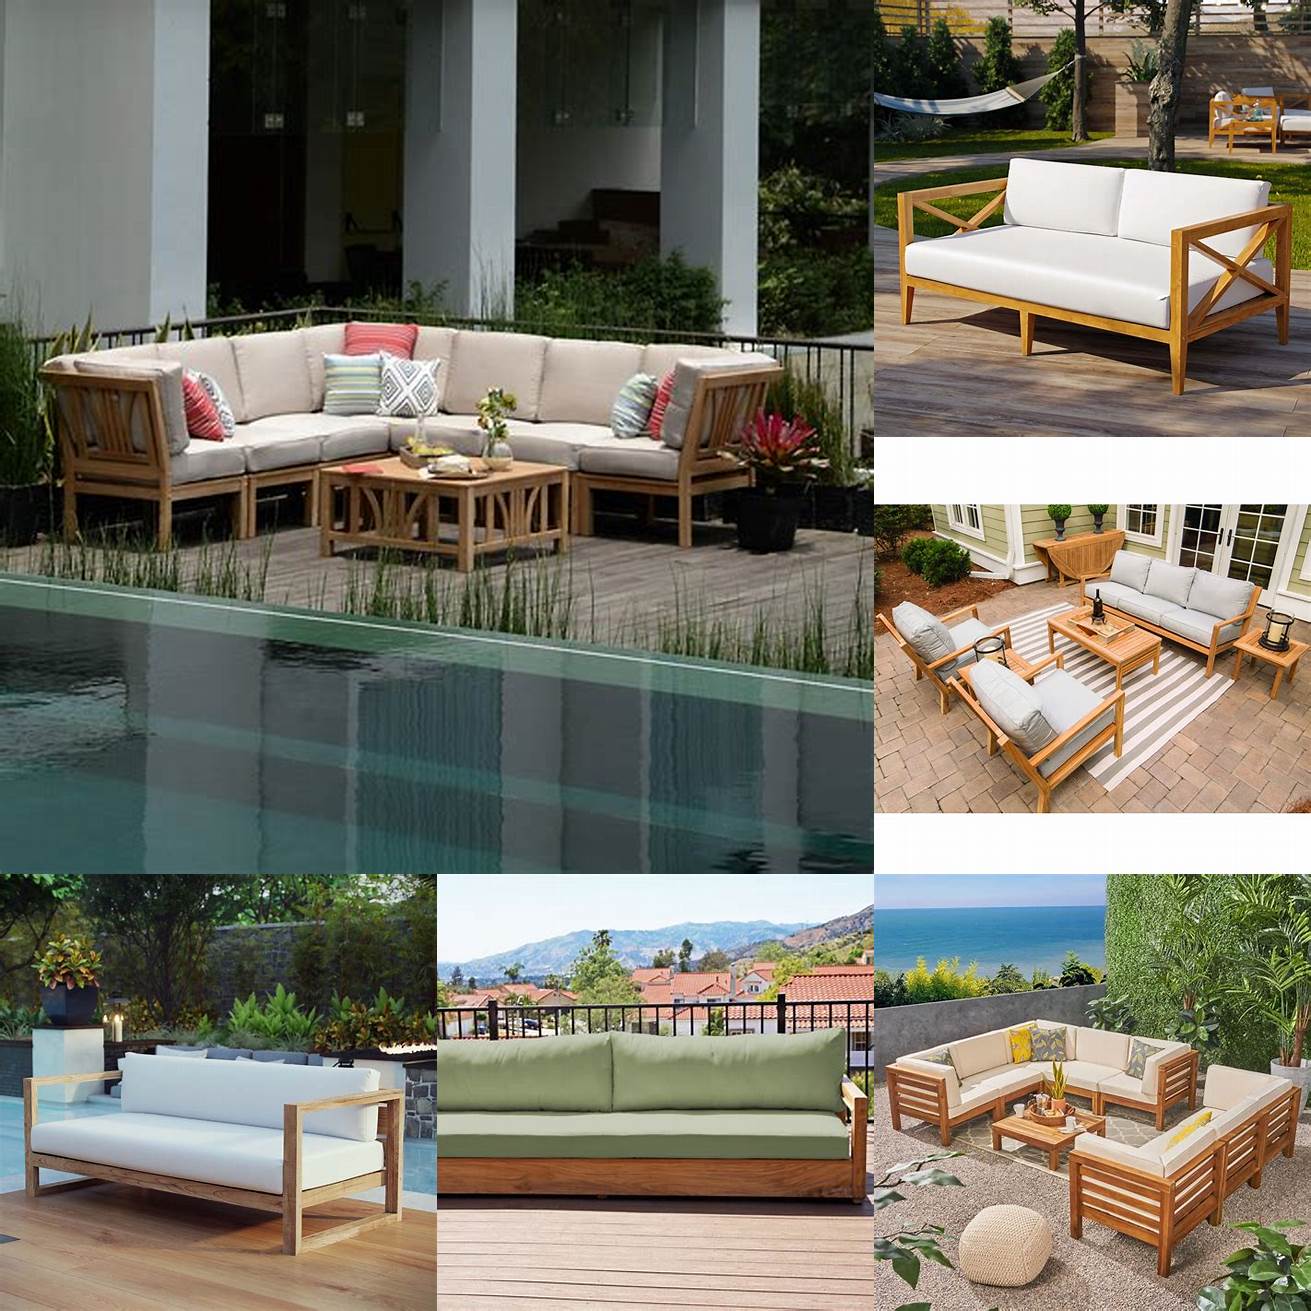 Teak Outdoor Sofa by a Pool